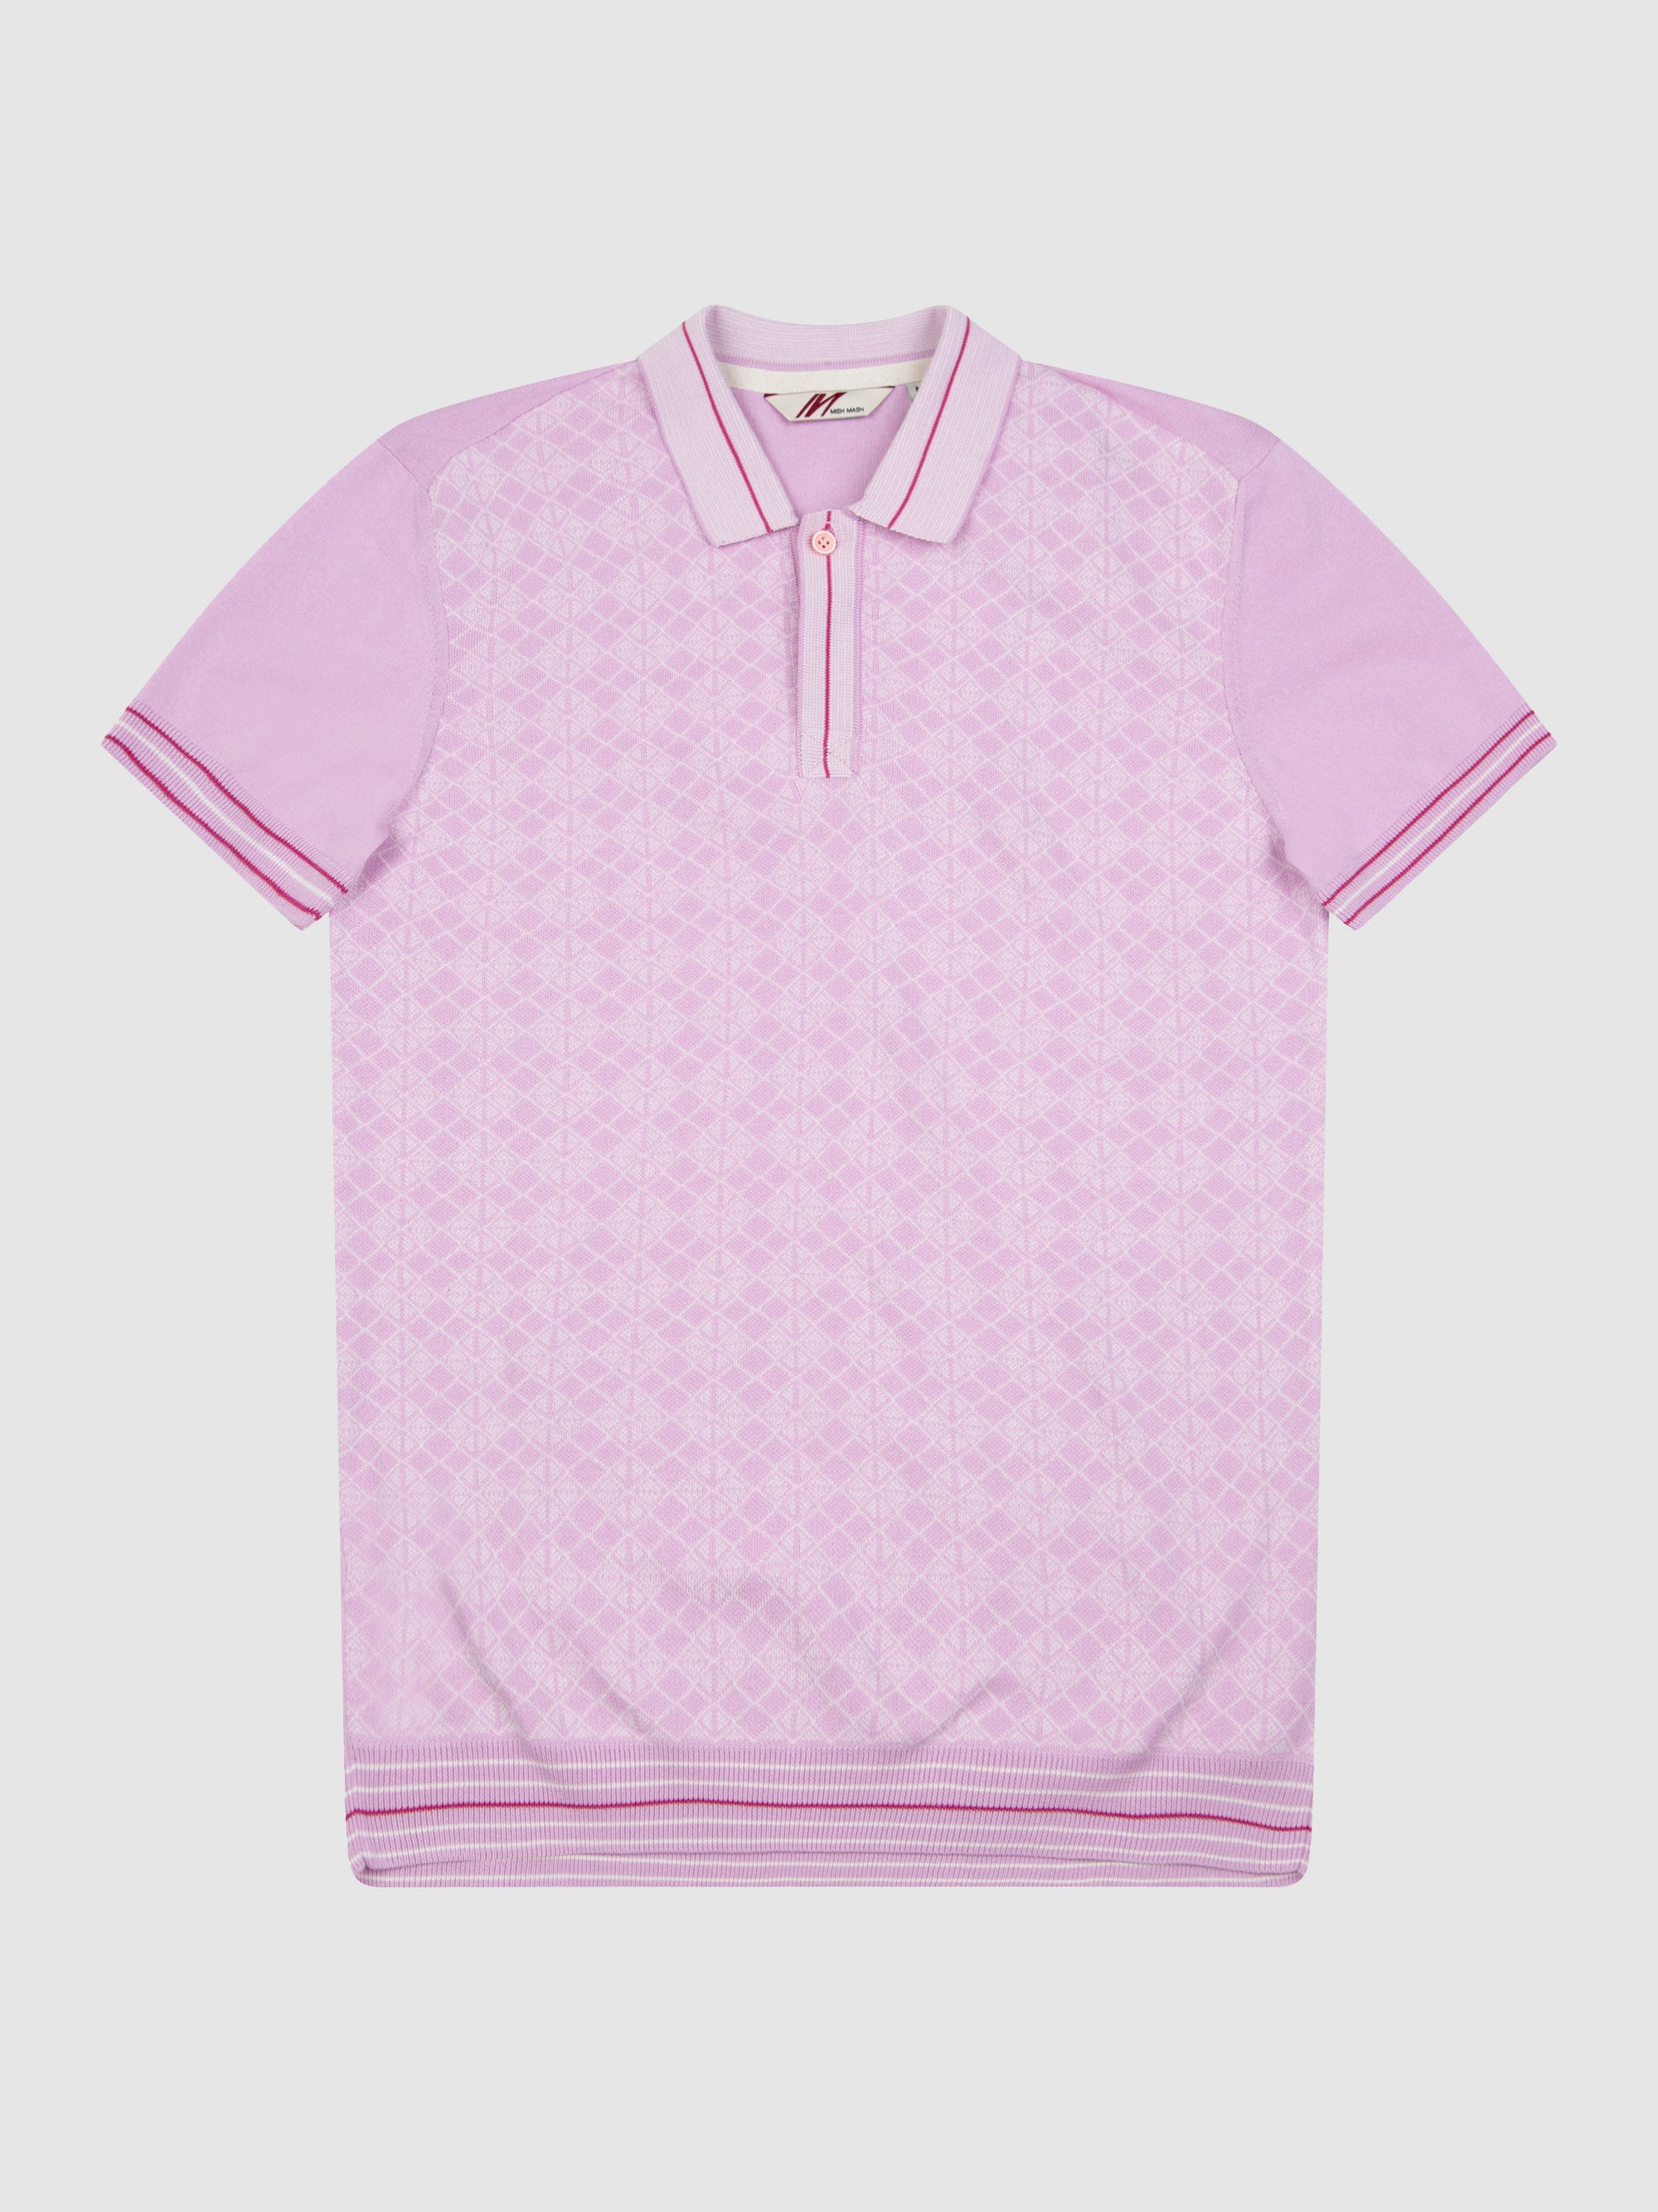 Frisbee Pale Pink Knit Polo